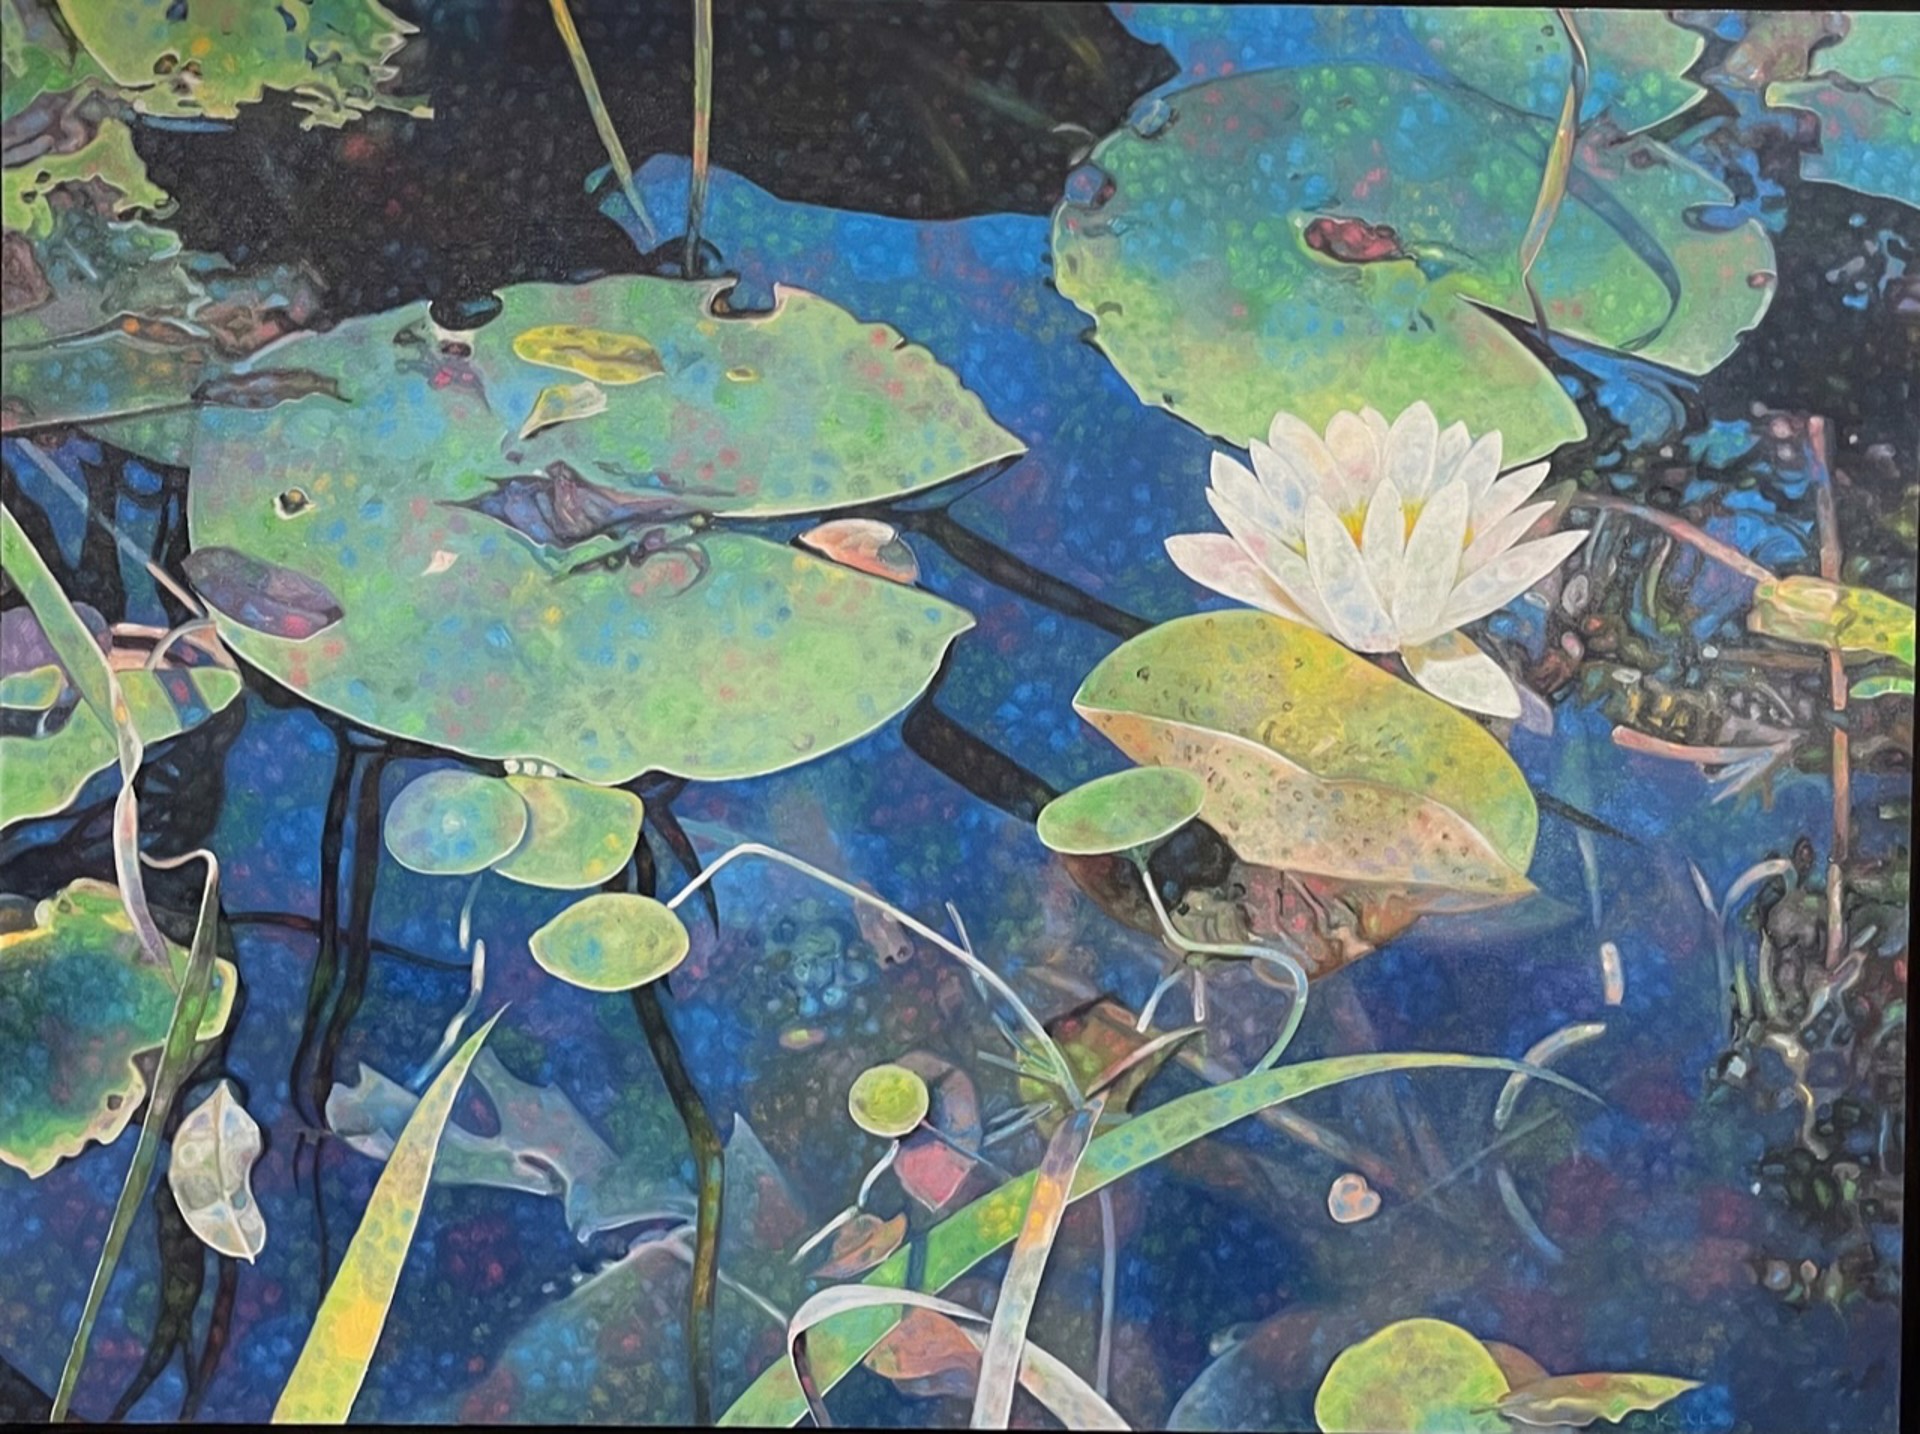 The Dancer's Pond with Lily by Edward Kellogg